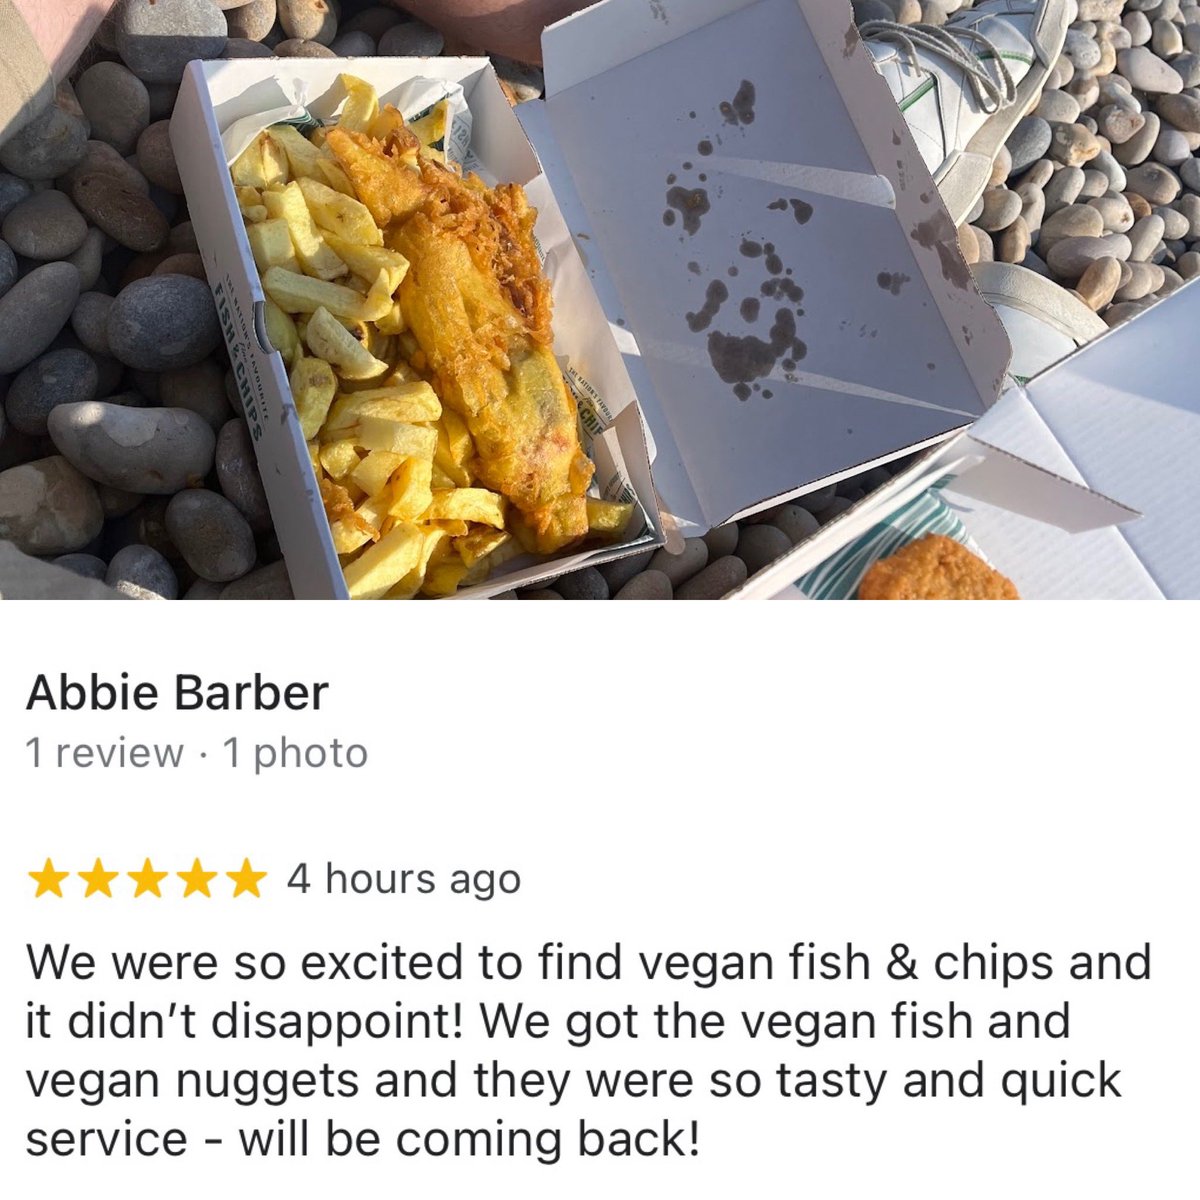 ⭐️⭐️⭐️⭐️⭐️

We love a Review & what better than 5 stars for our #veganmenu 

Thanks to Abbie for this google review & fab photo. 

Get posting your #chesilchippie pics, we LOVE to see & repost them 💙